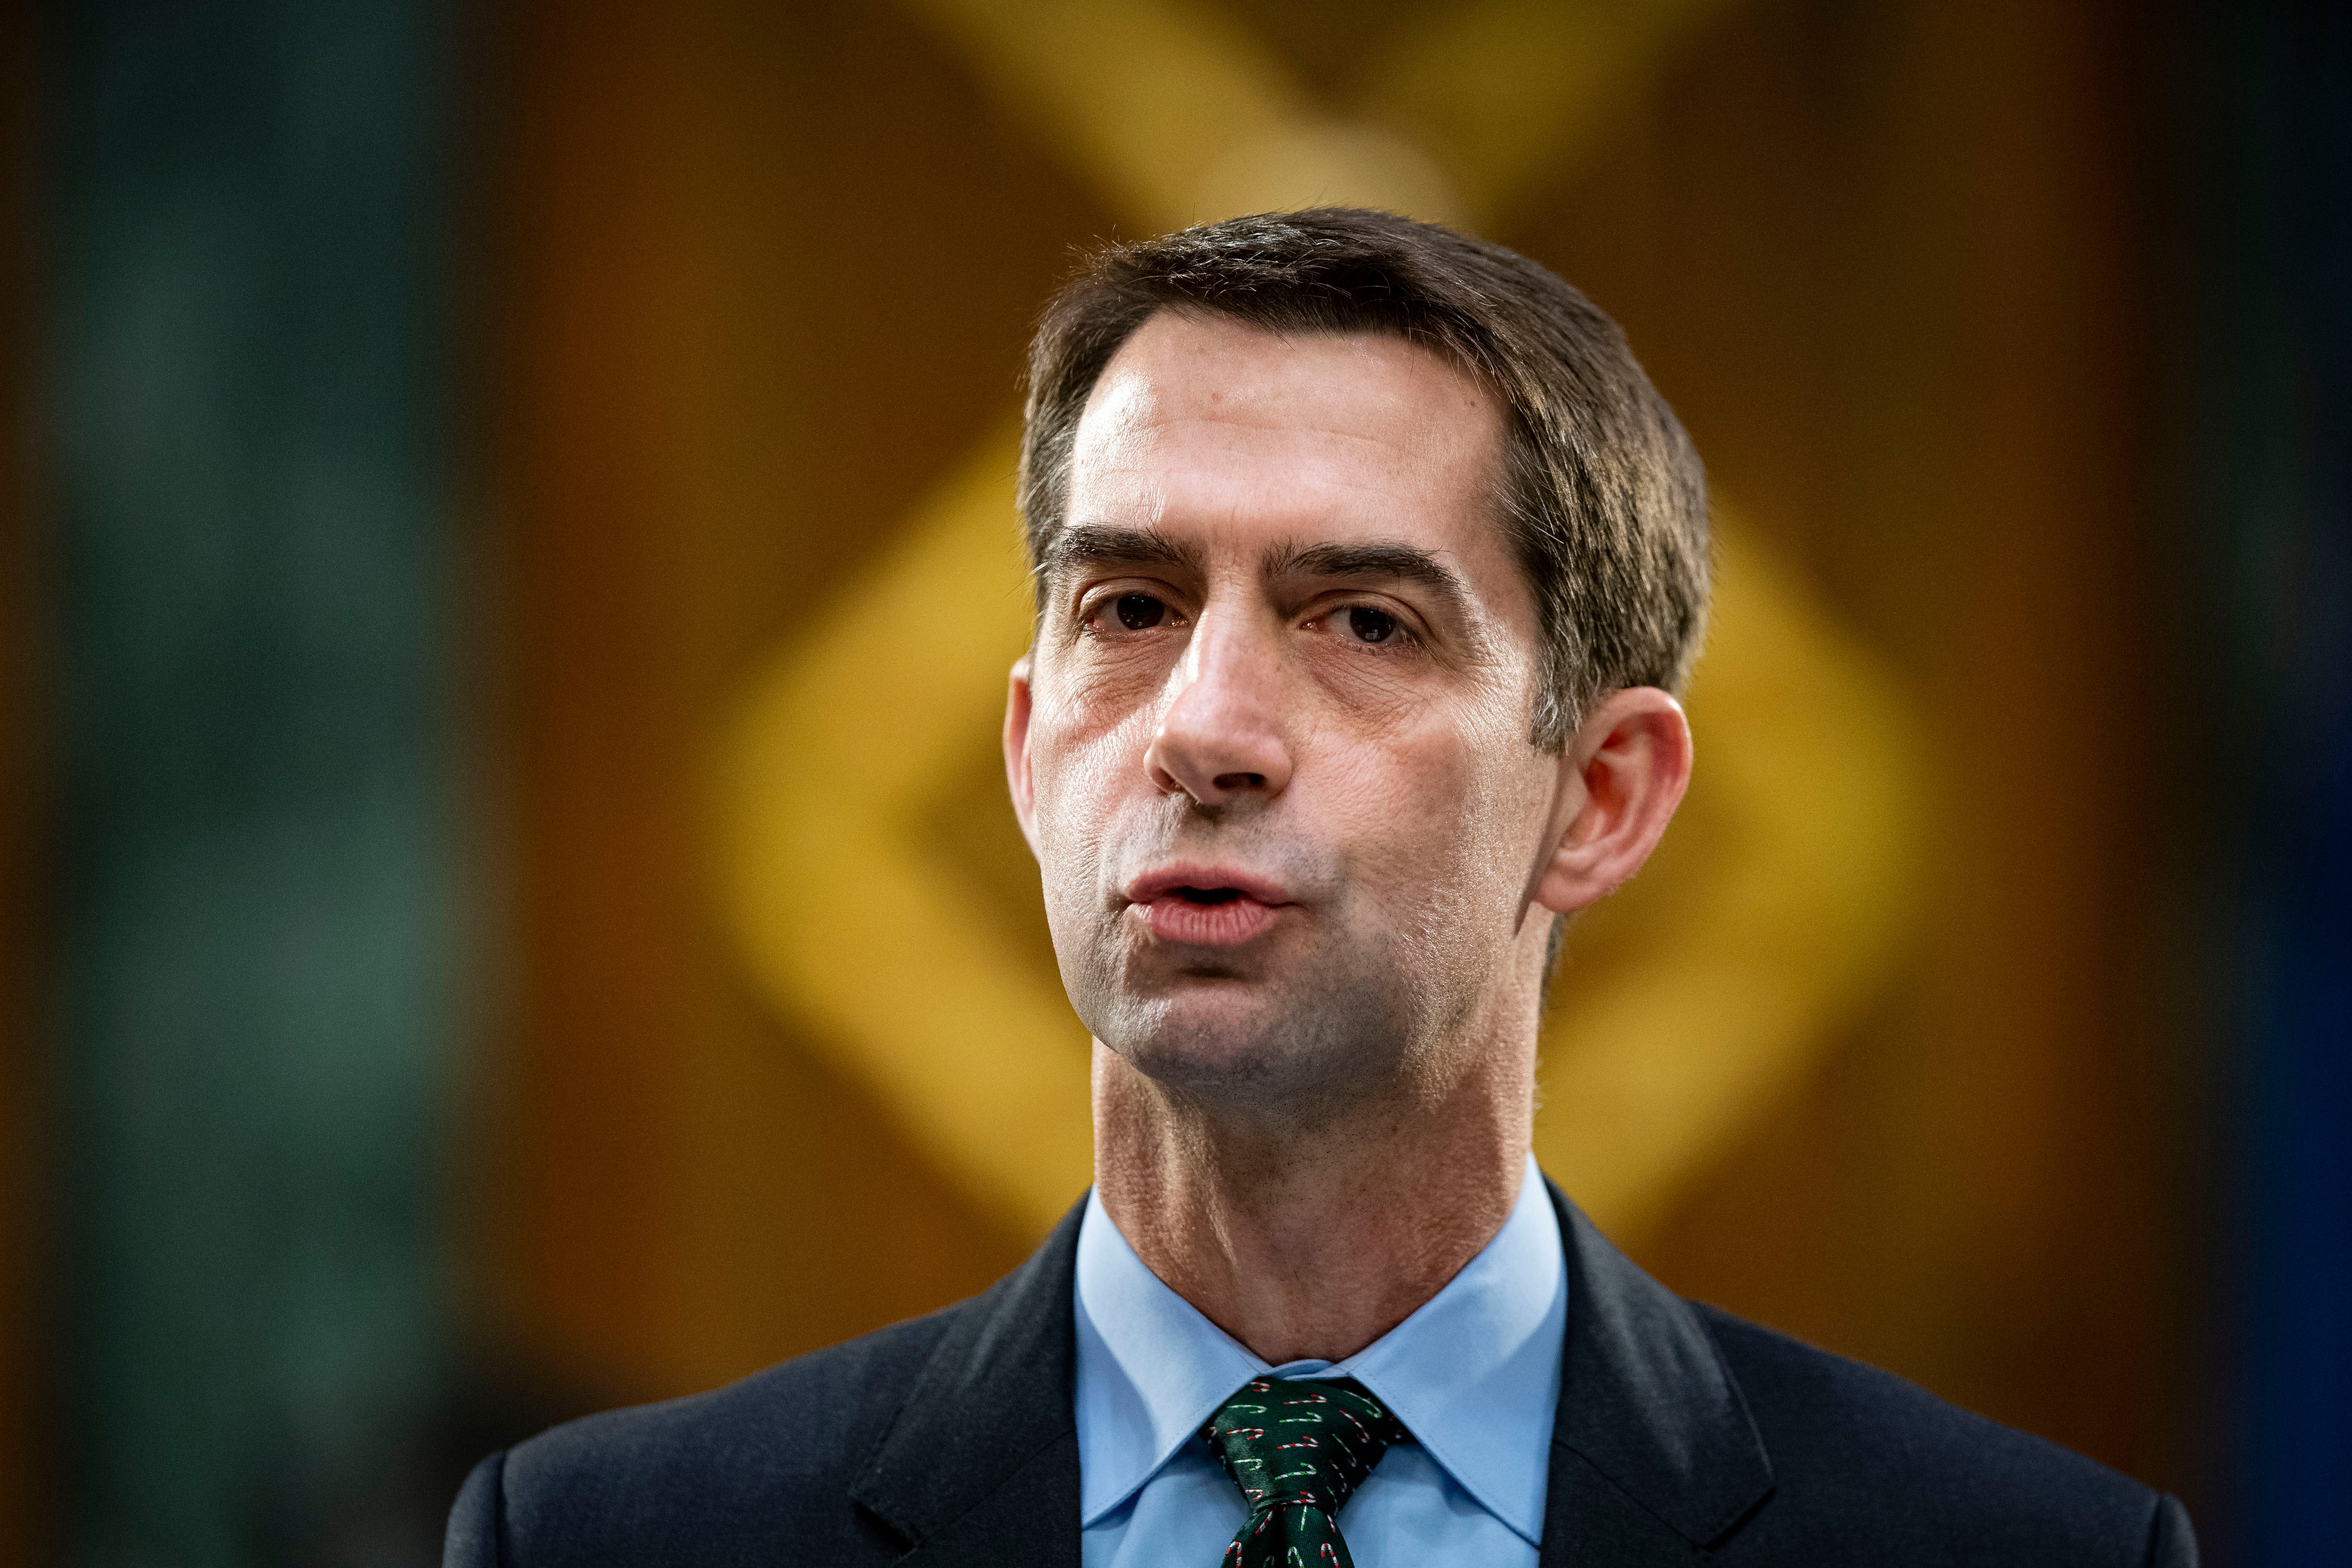 Trump ally Tom Cotton accused of lying about military service